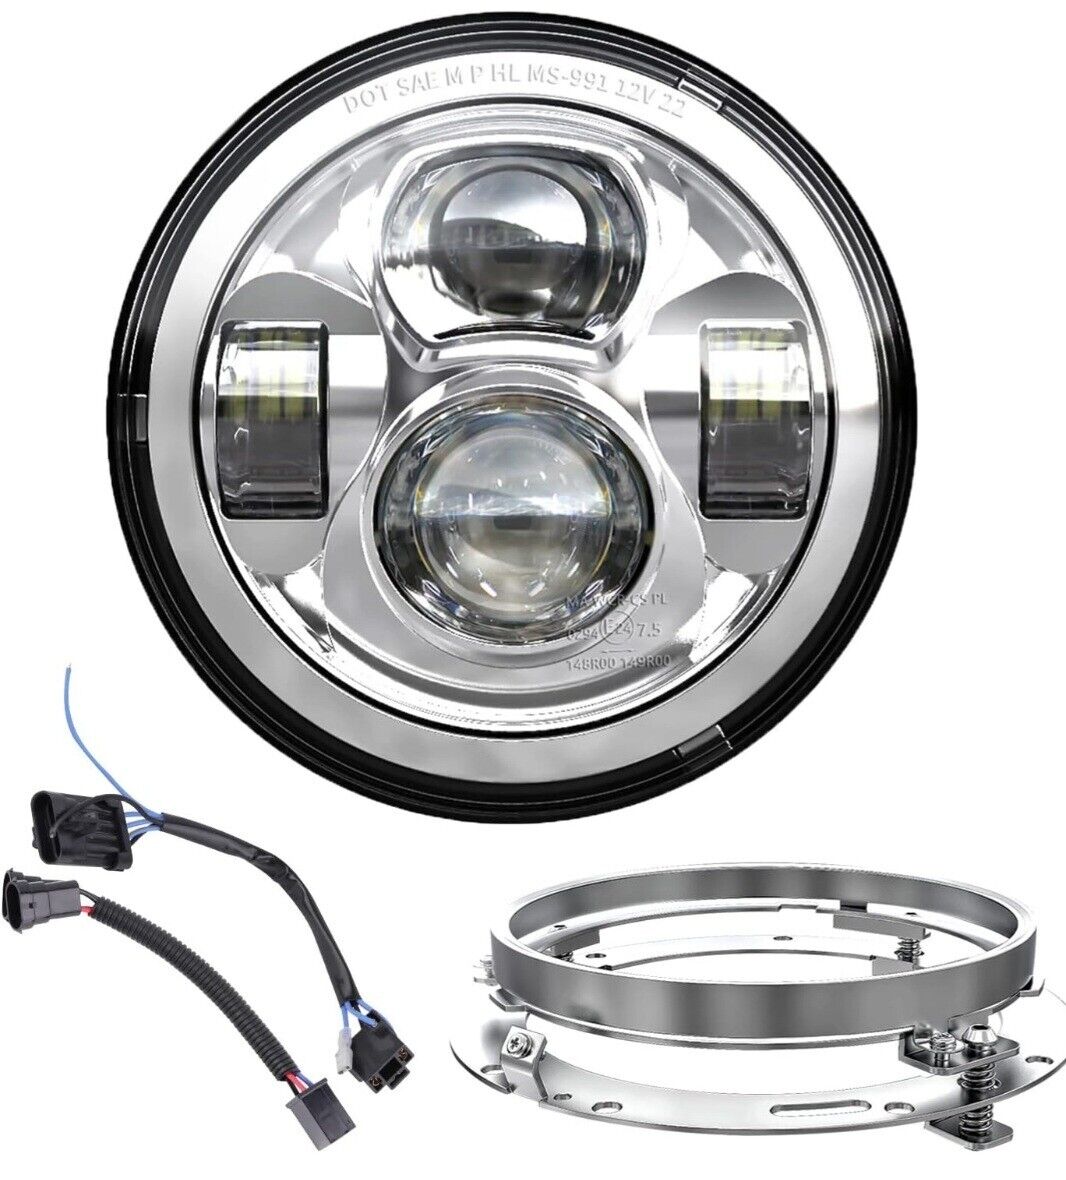 Z-OFFROAD New Motorcycle 7 Inch LED Headlight DOT Kit Compatible with Harley Dav